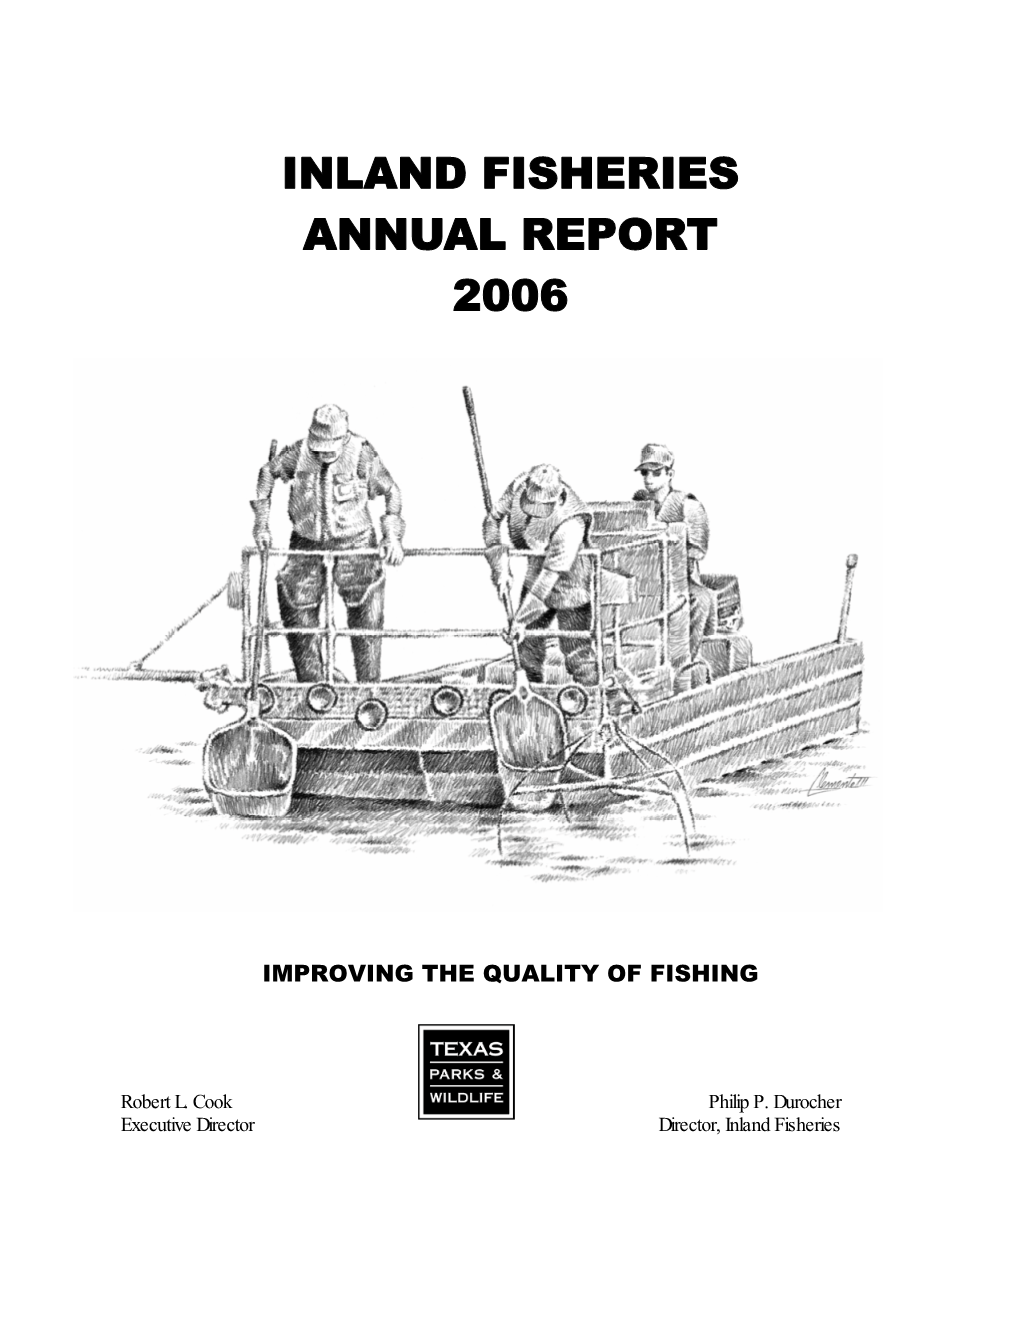 Inland Fisheries Annual Report 2006